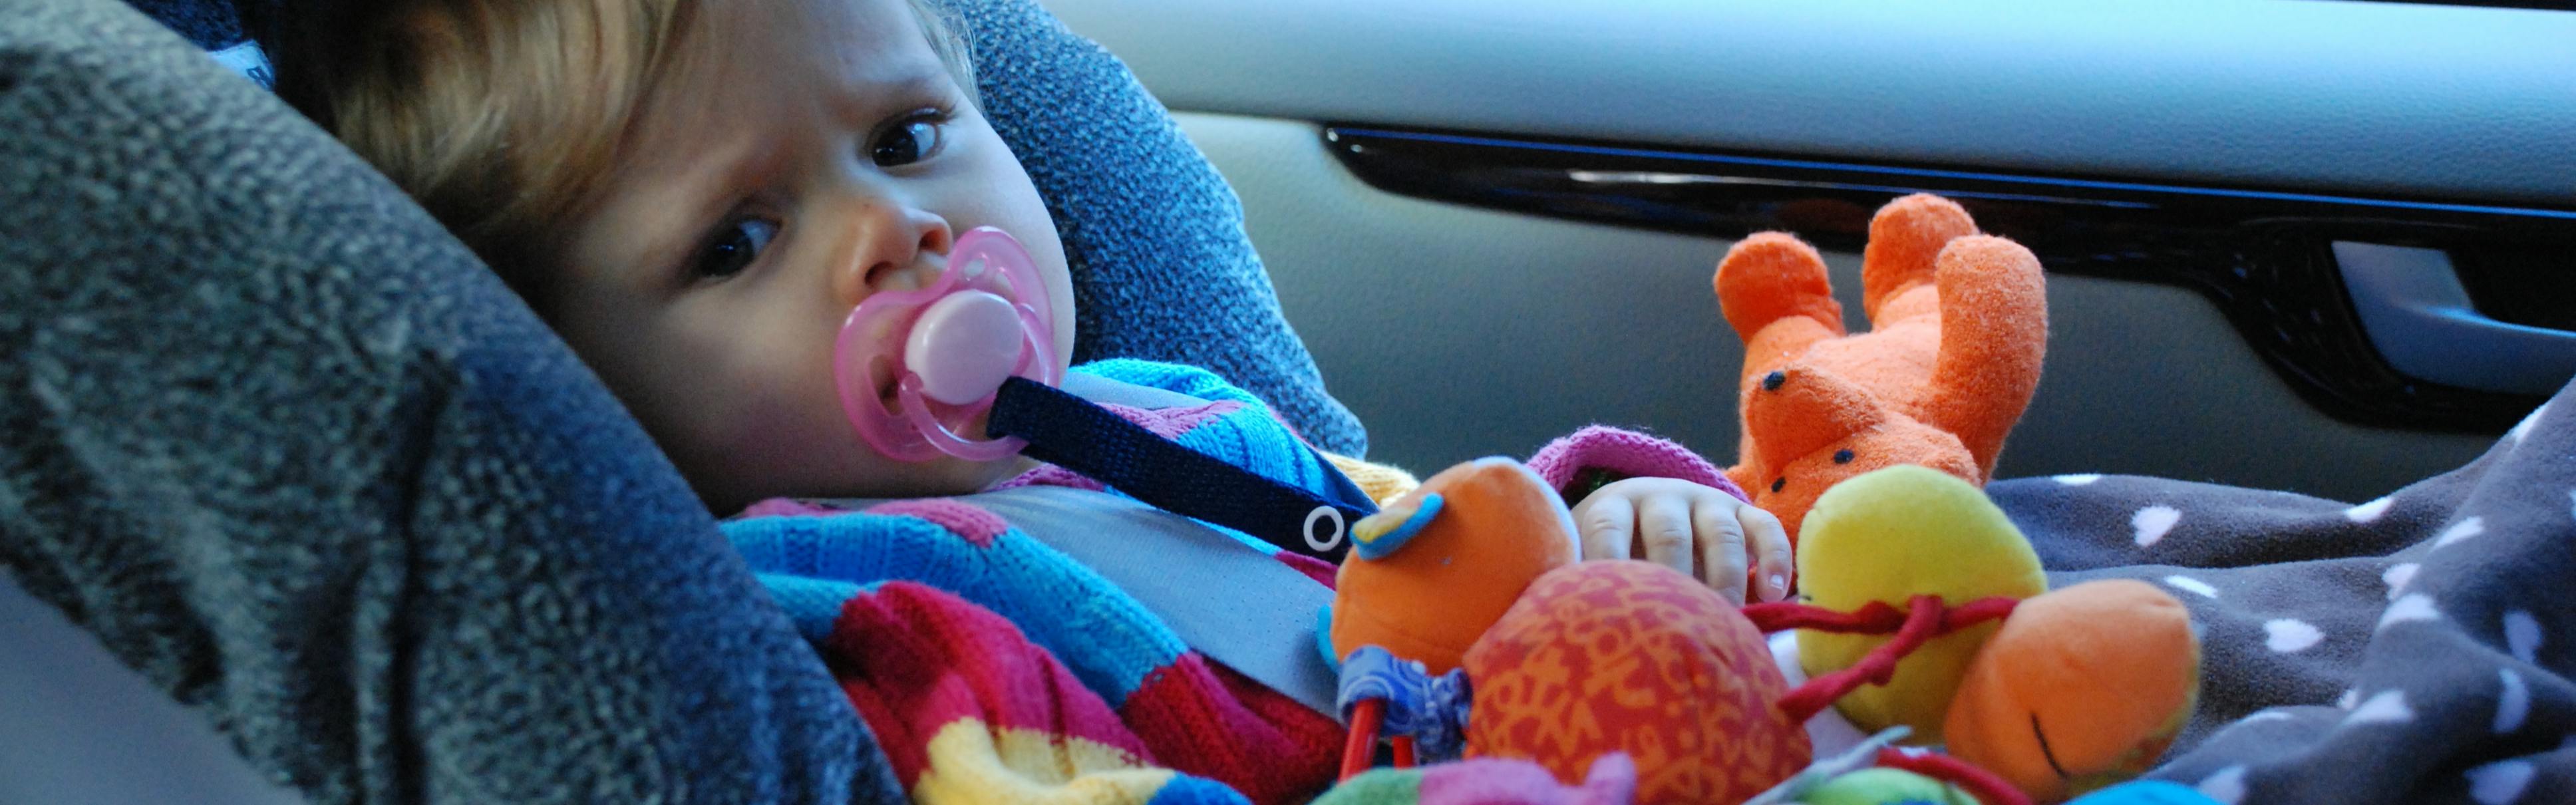 What Baby Car Seat Accessories Do You Need?